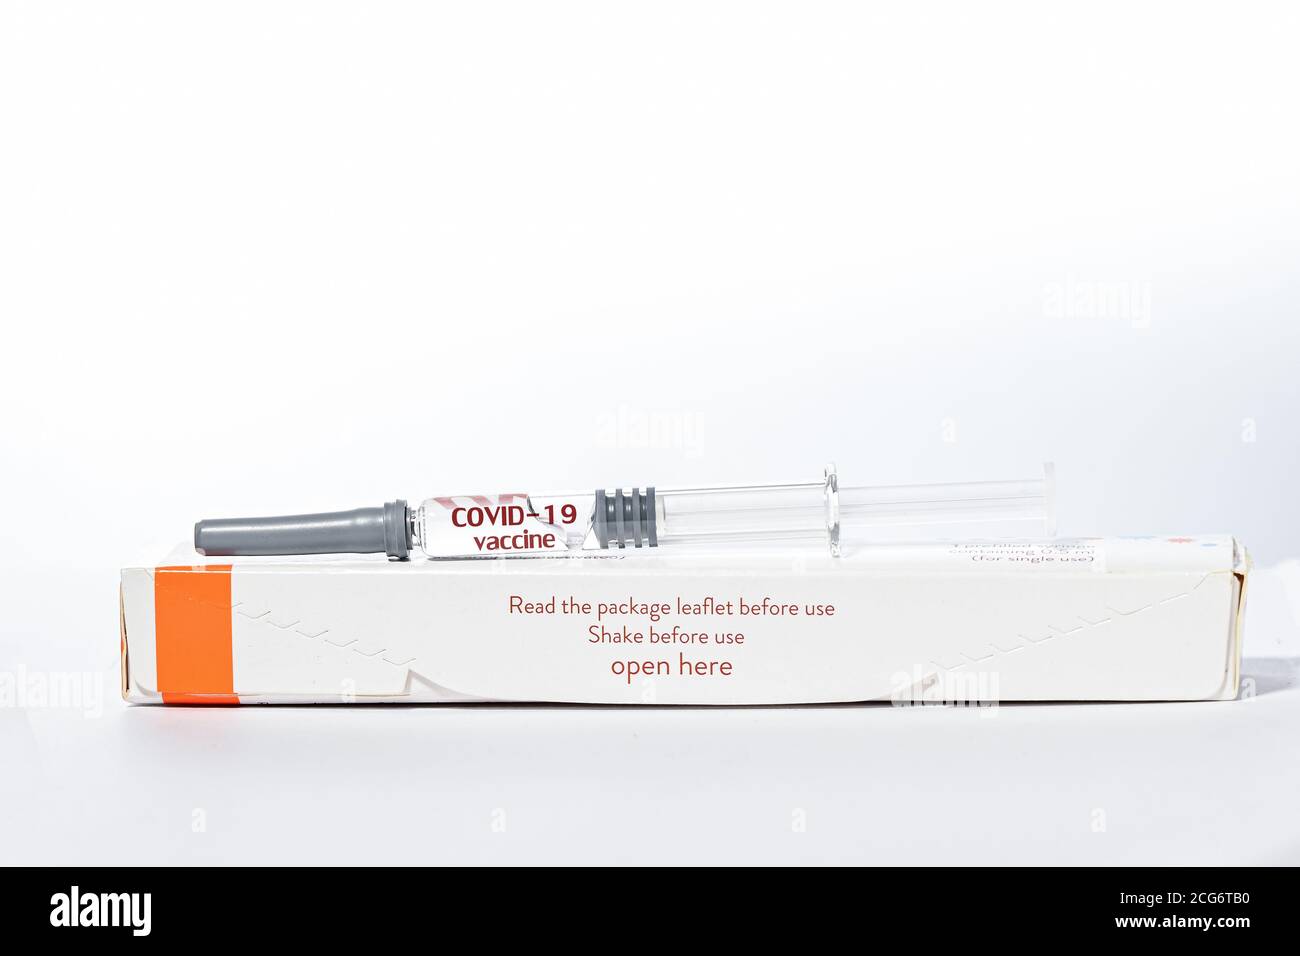 Coronavirus COVID-19 Vaccine,Vaccine and syringe injection for prevention, immunization and treatment Stop Pandemic from COVID-19 infectious, Medicine Stock Photo